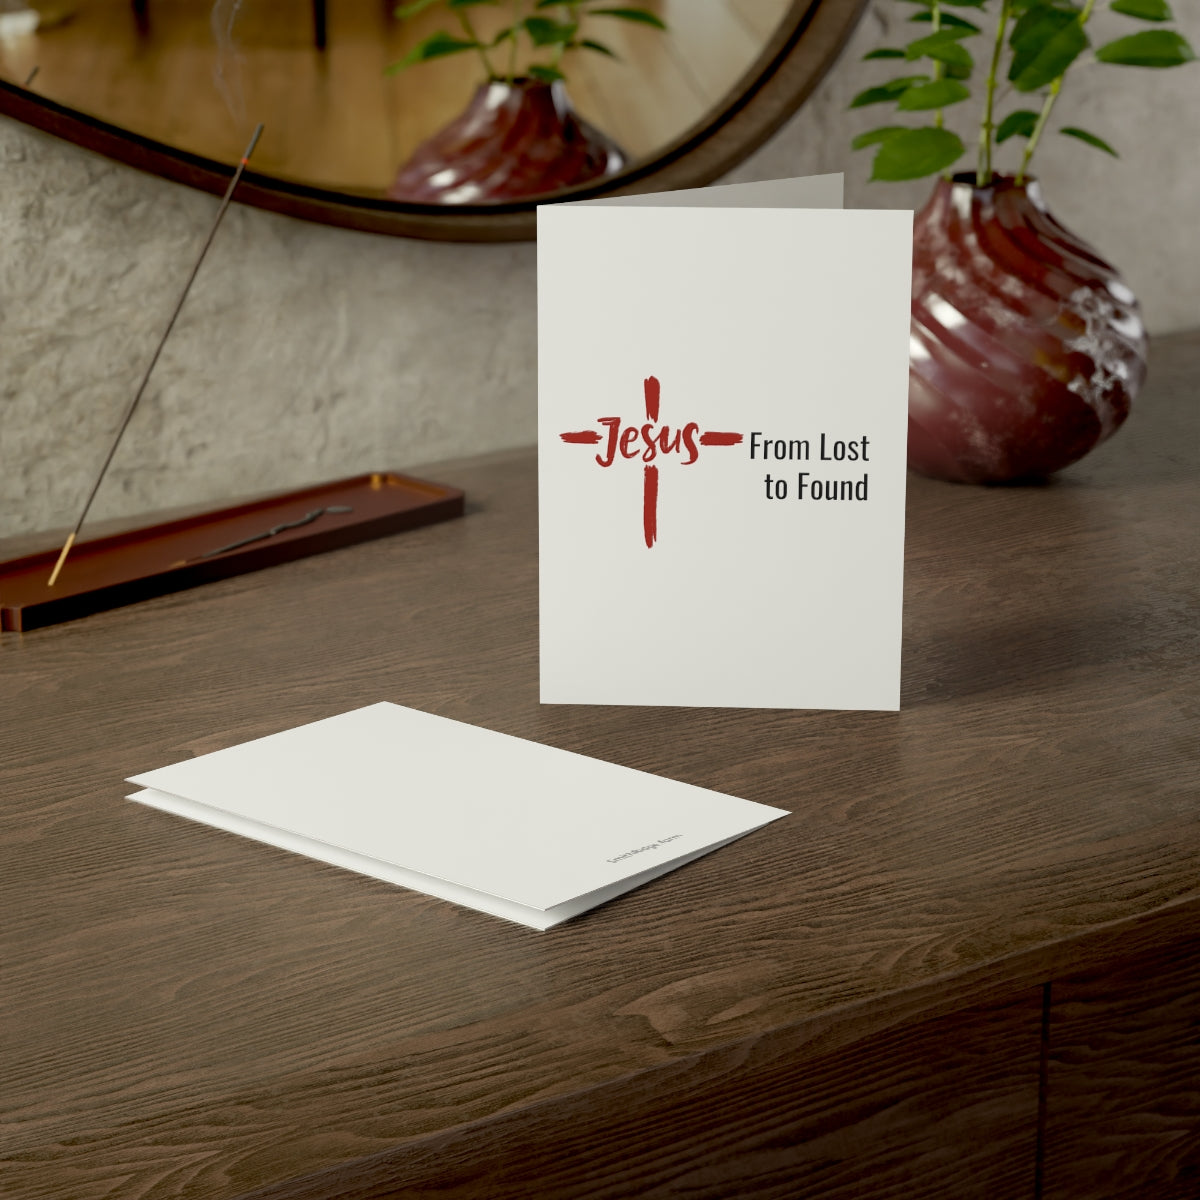 Jesus, From Lost to Found Greeting Cards available at SmithRidge.farm in size 5"x7" with envelopes.